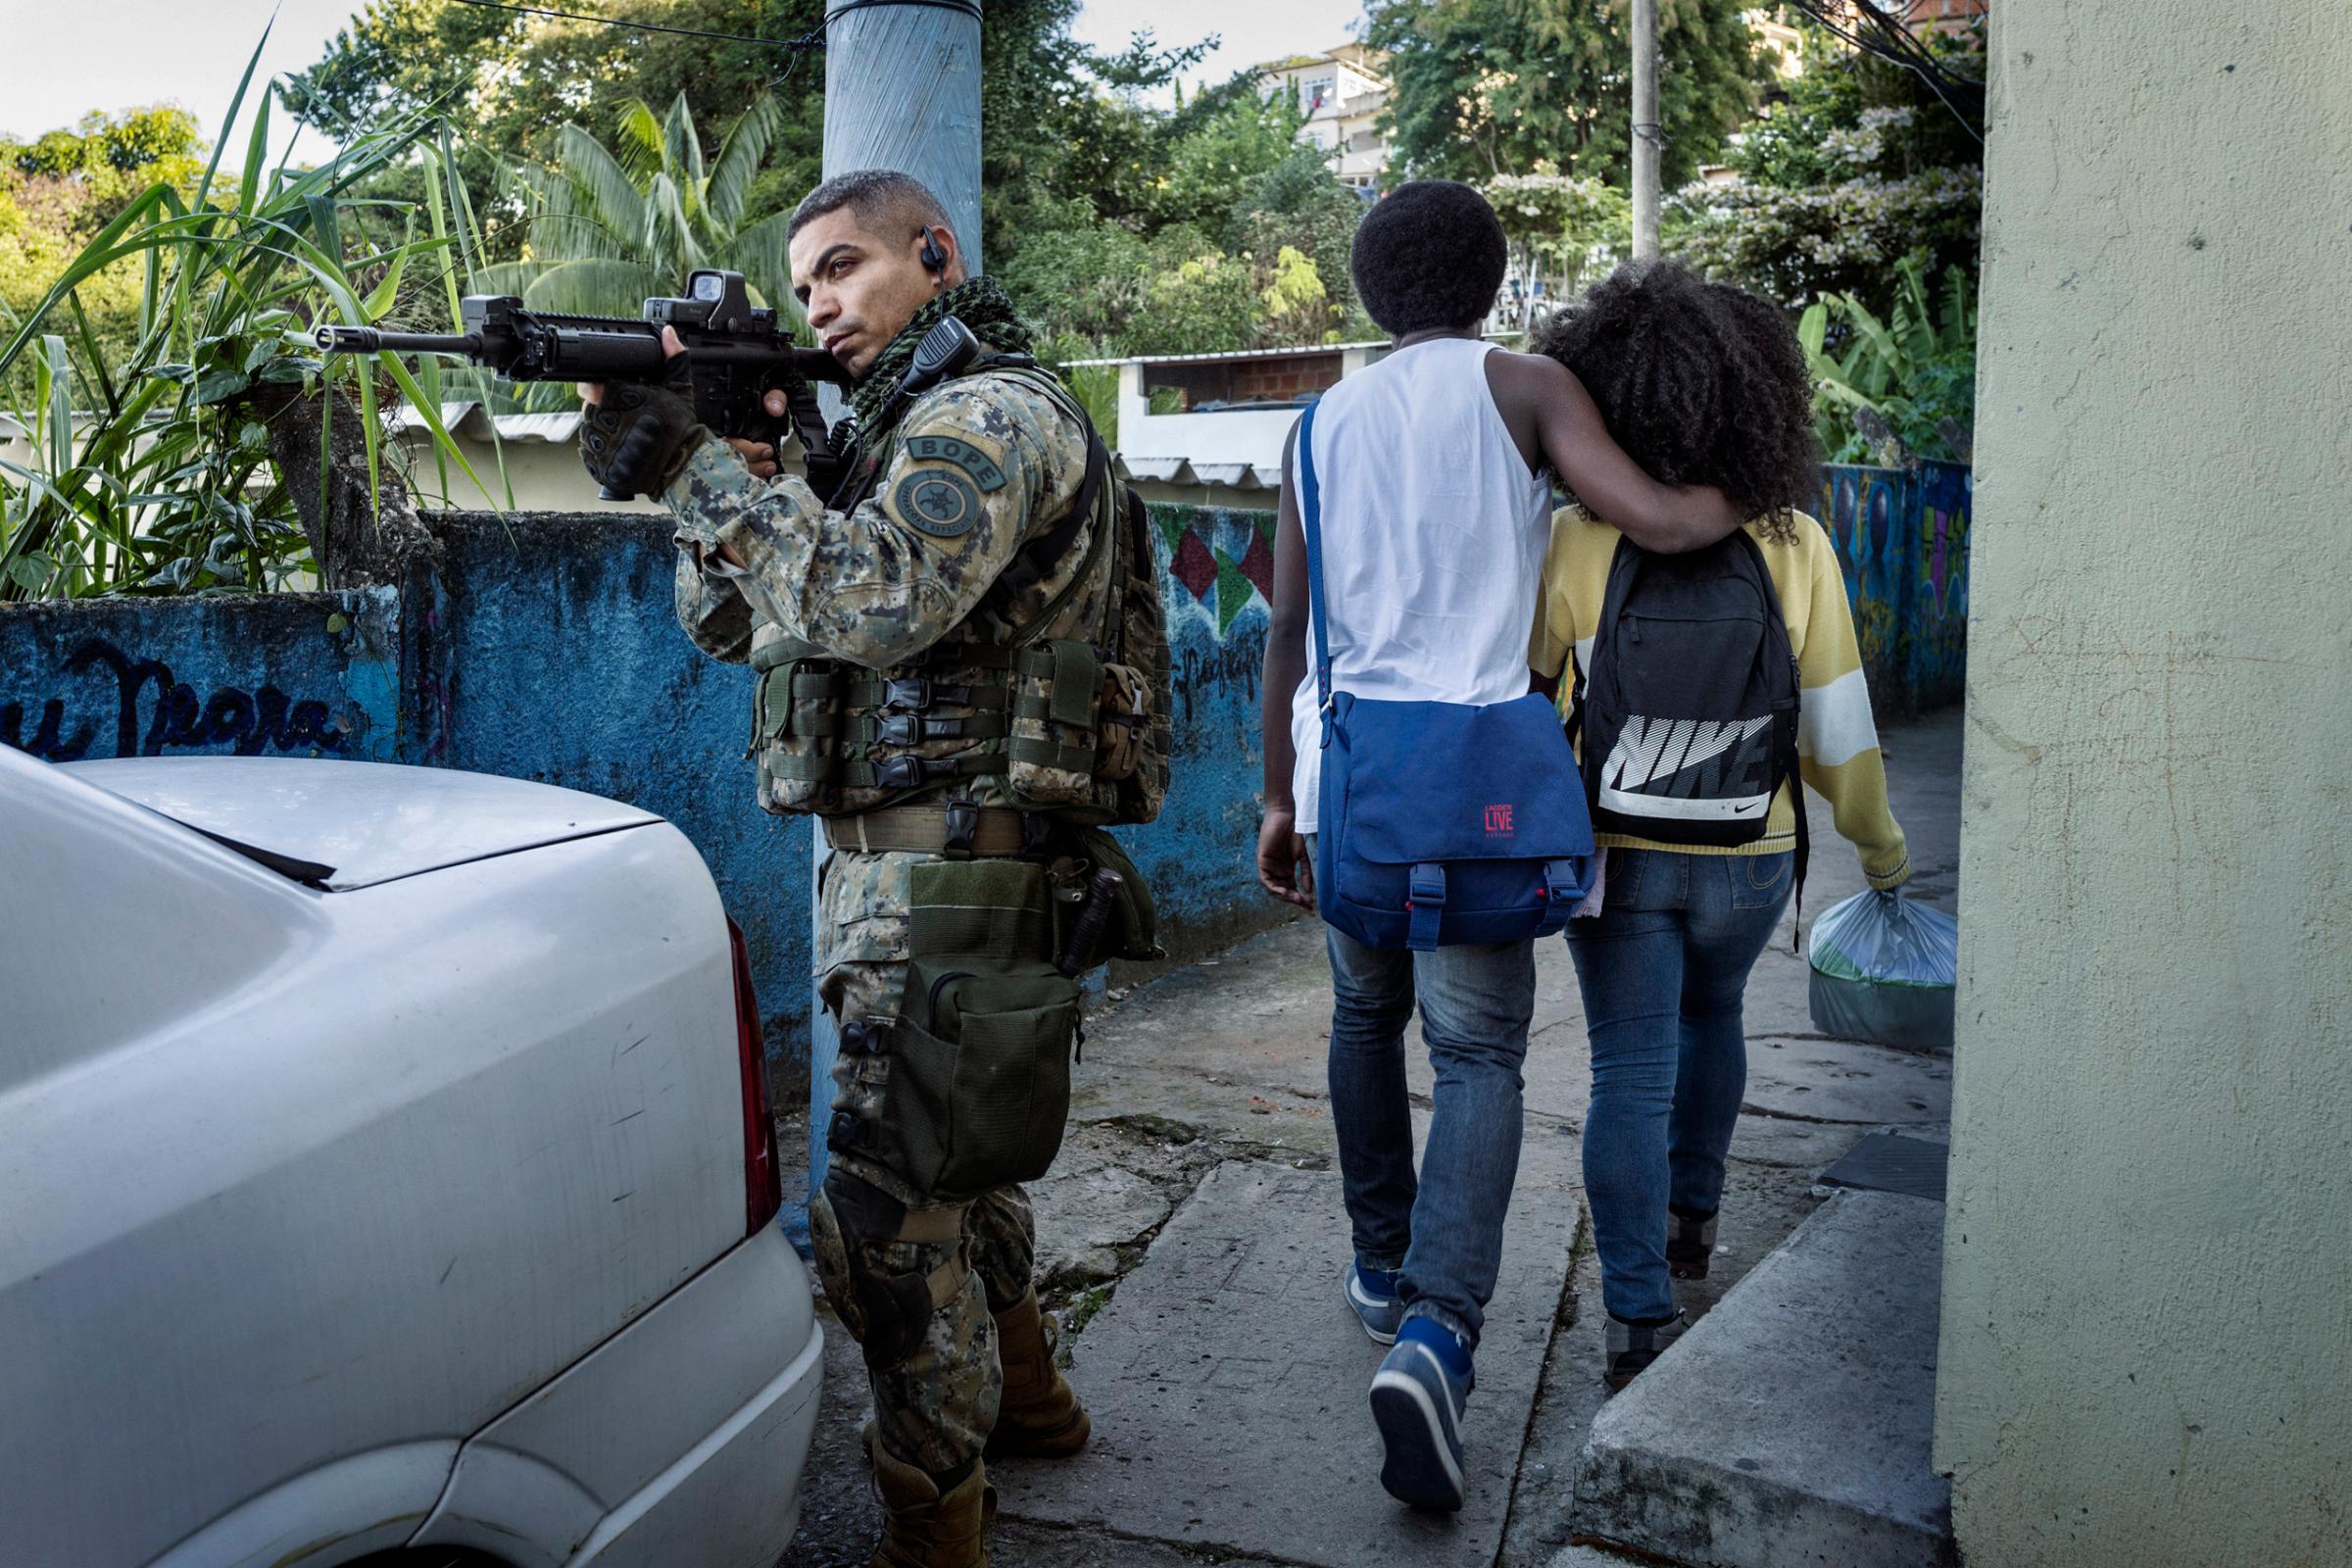 Corporal Cruz of BOPE (Battalion of Special Police Operations) during an exercise in a densely populated urban area in the Tavares favela in Rio de Janeiro.